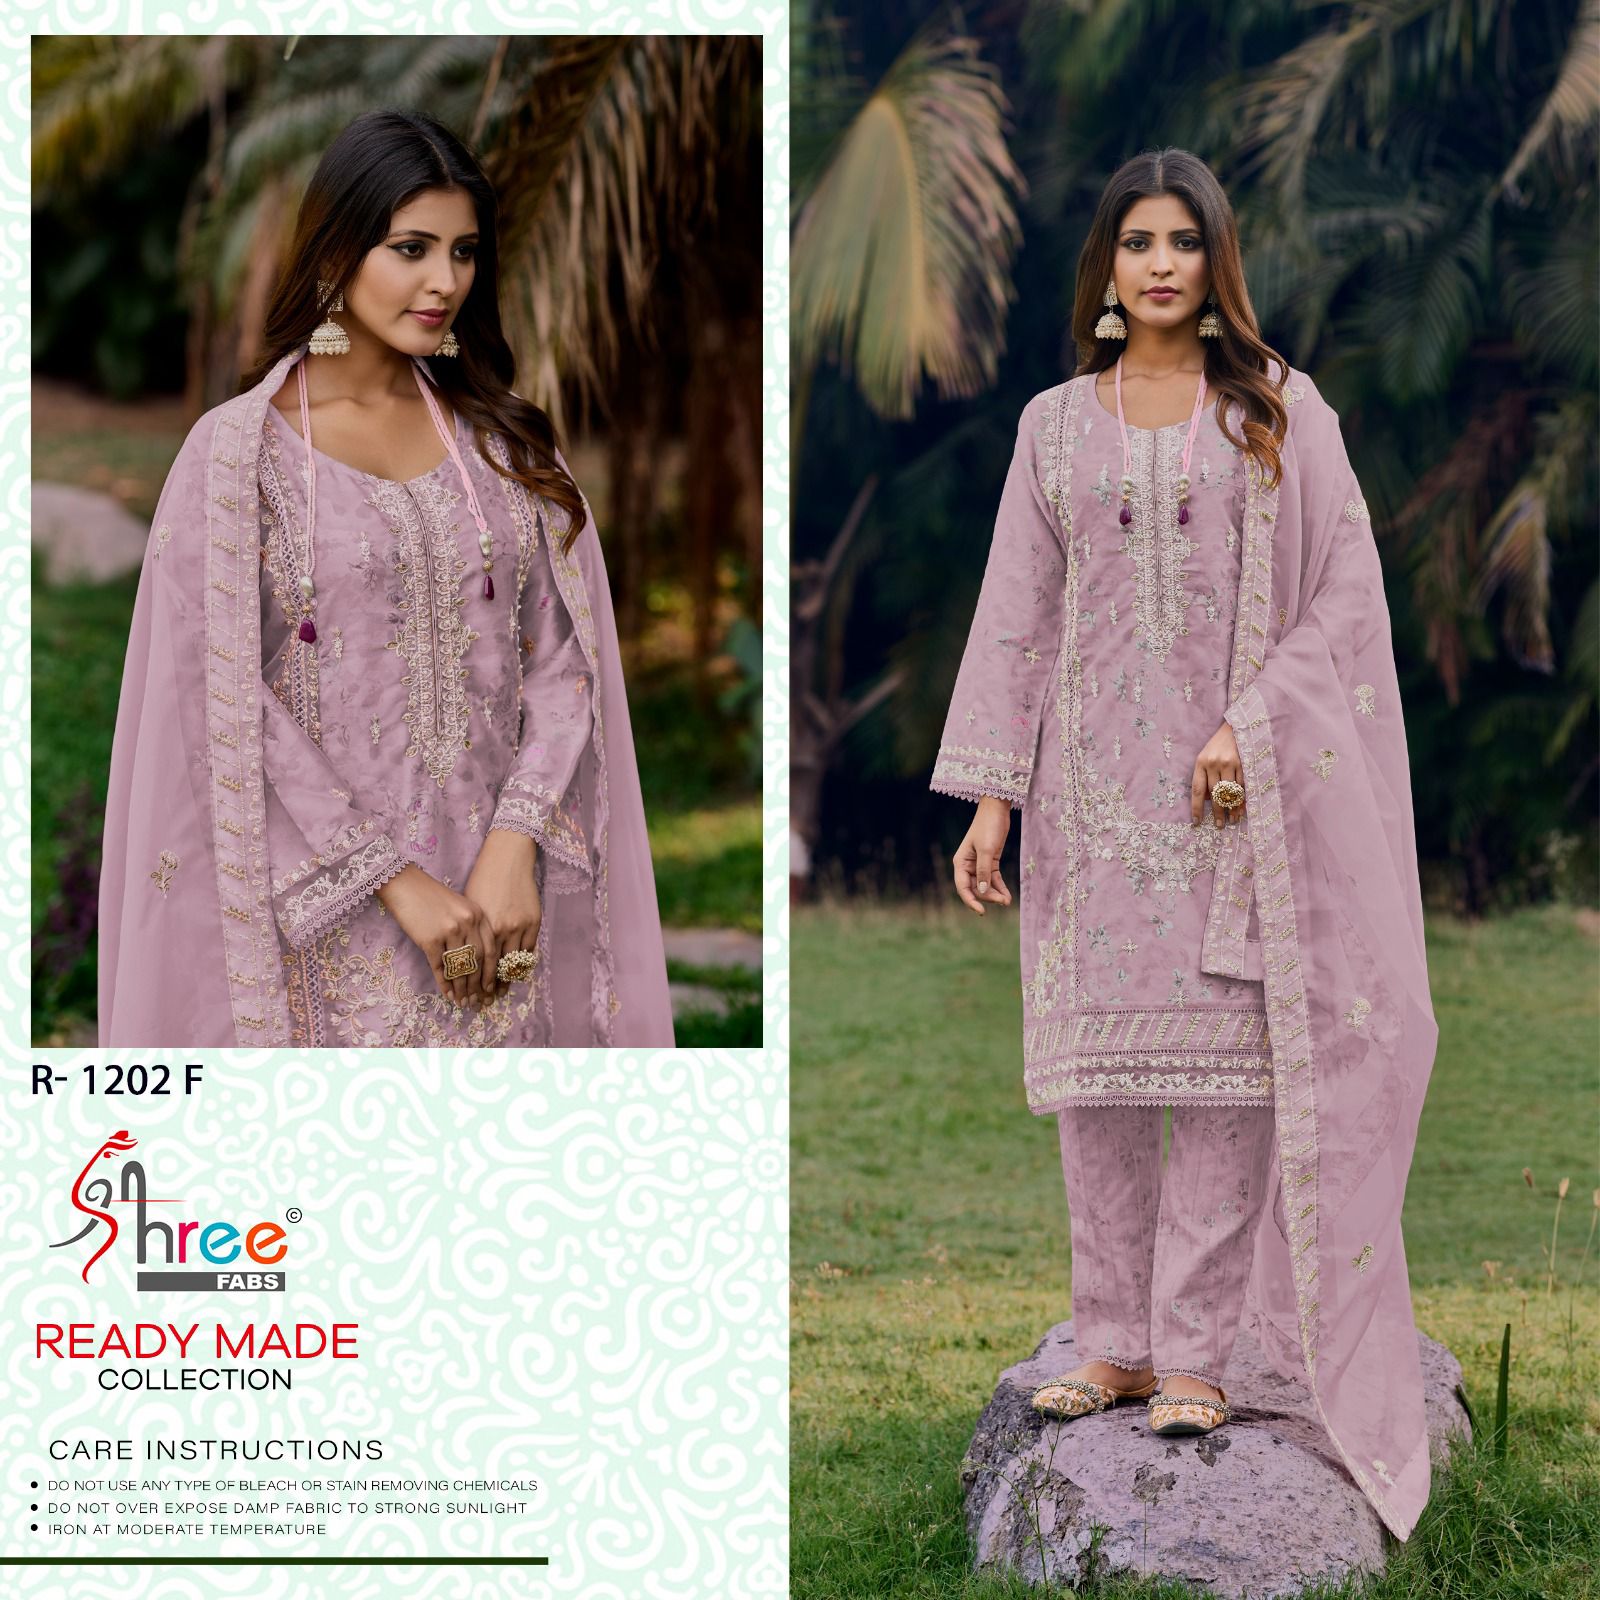 SHREE FAB READY MADE COLLECTION R-1202-F